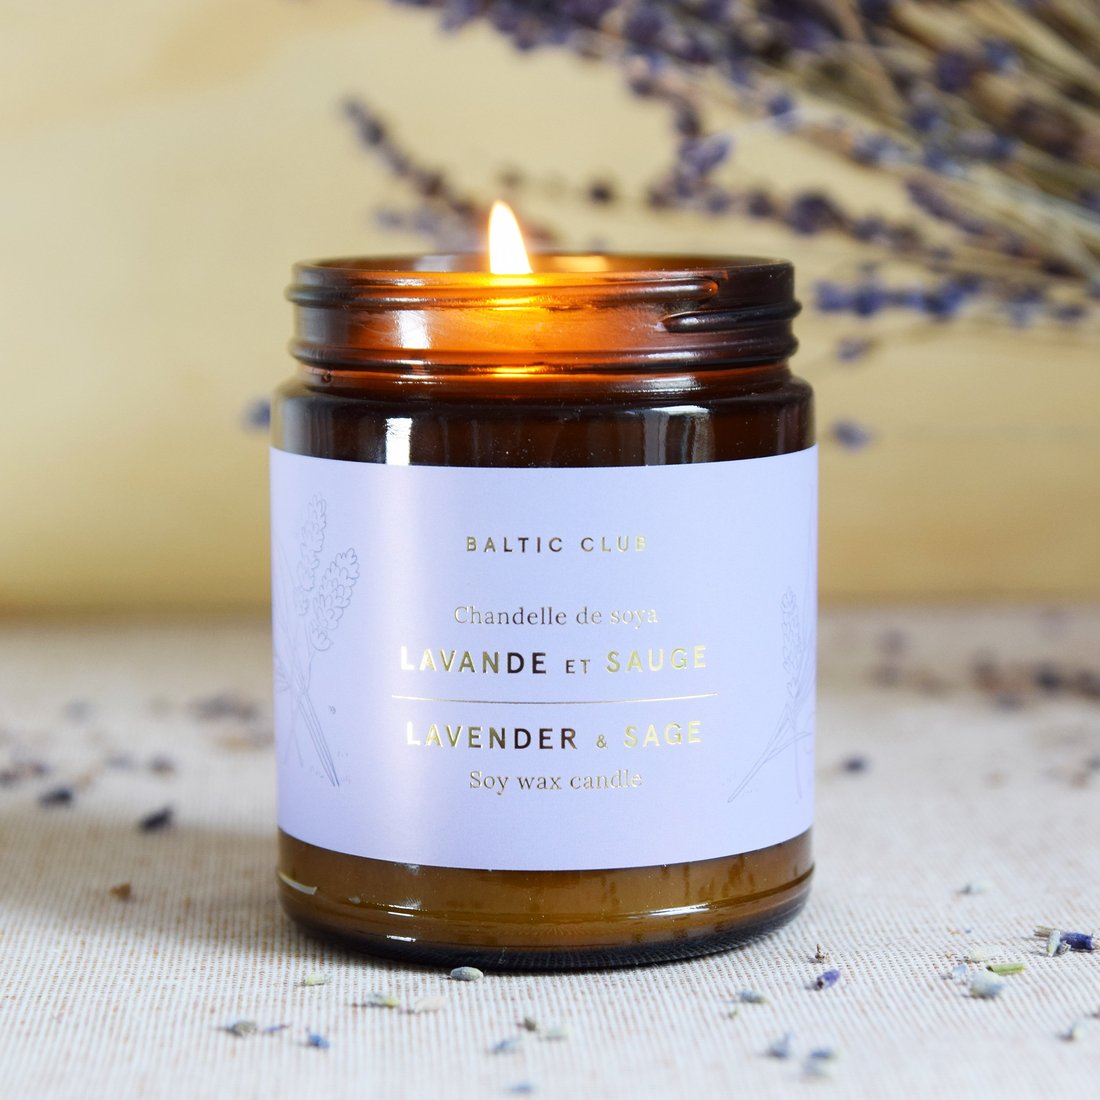 Baltic Club Lavender & Sage Soy Candle